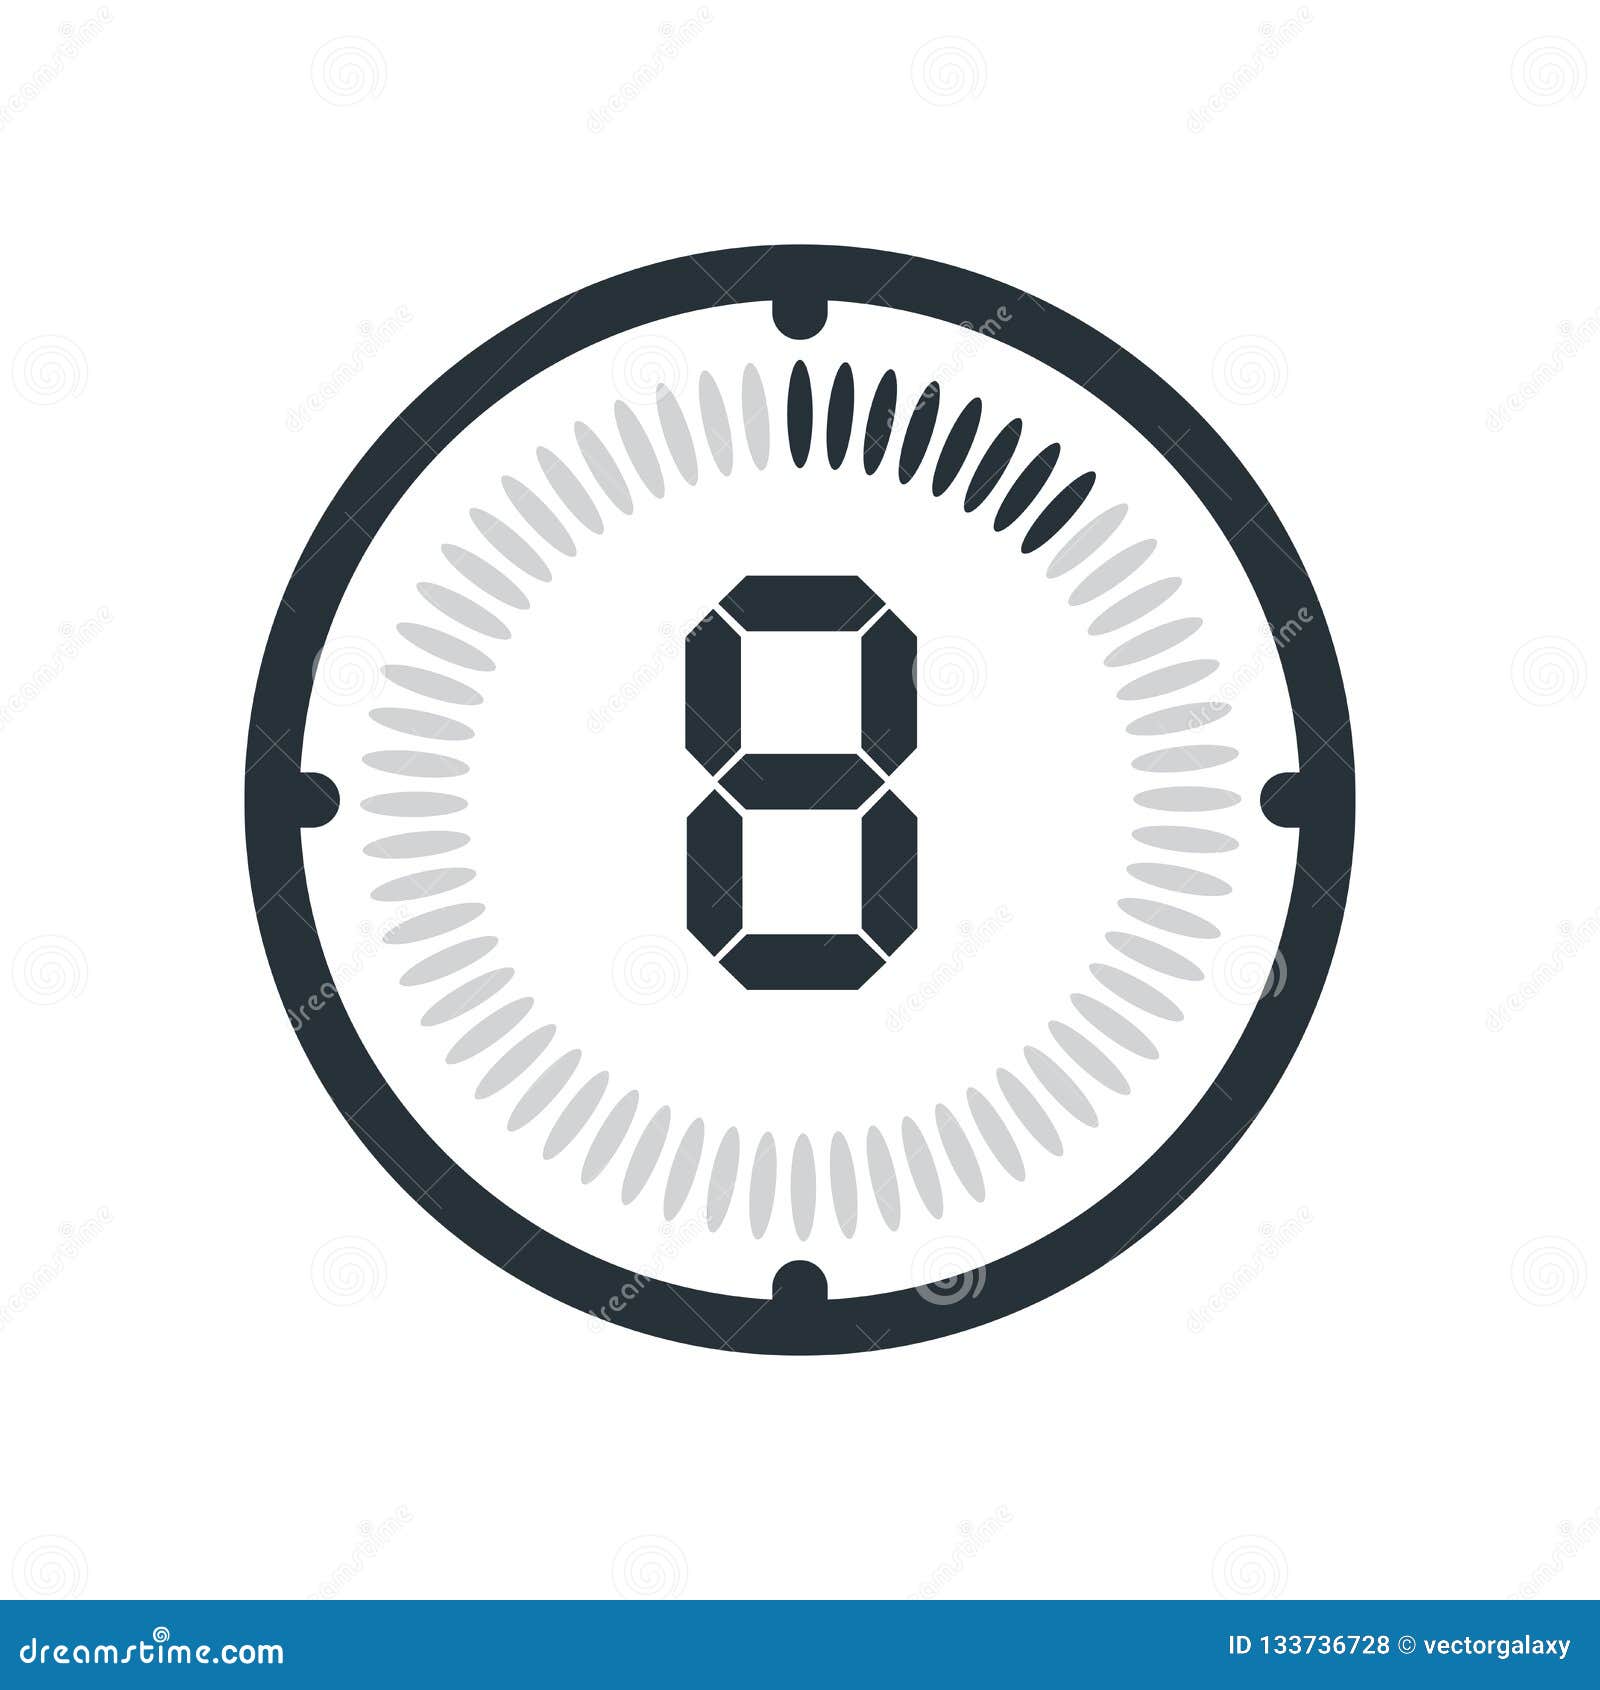 The 8 Minutes Icon Isolated on White Background, Clock and Watch Stock Vector - Illustration of dial, 133736728